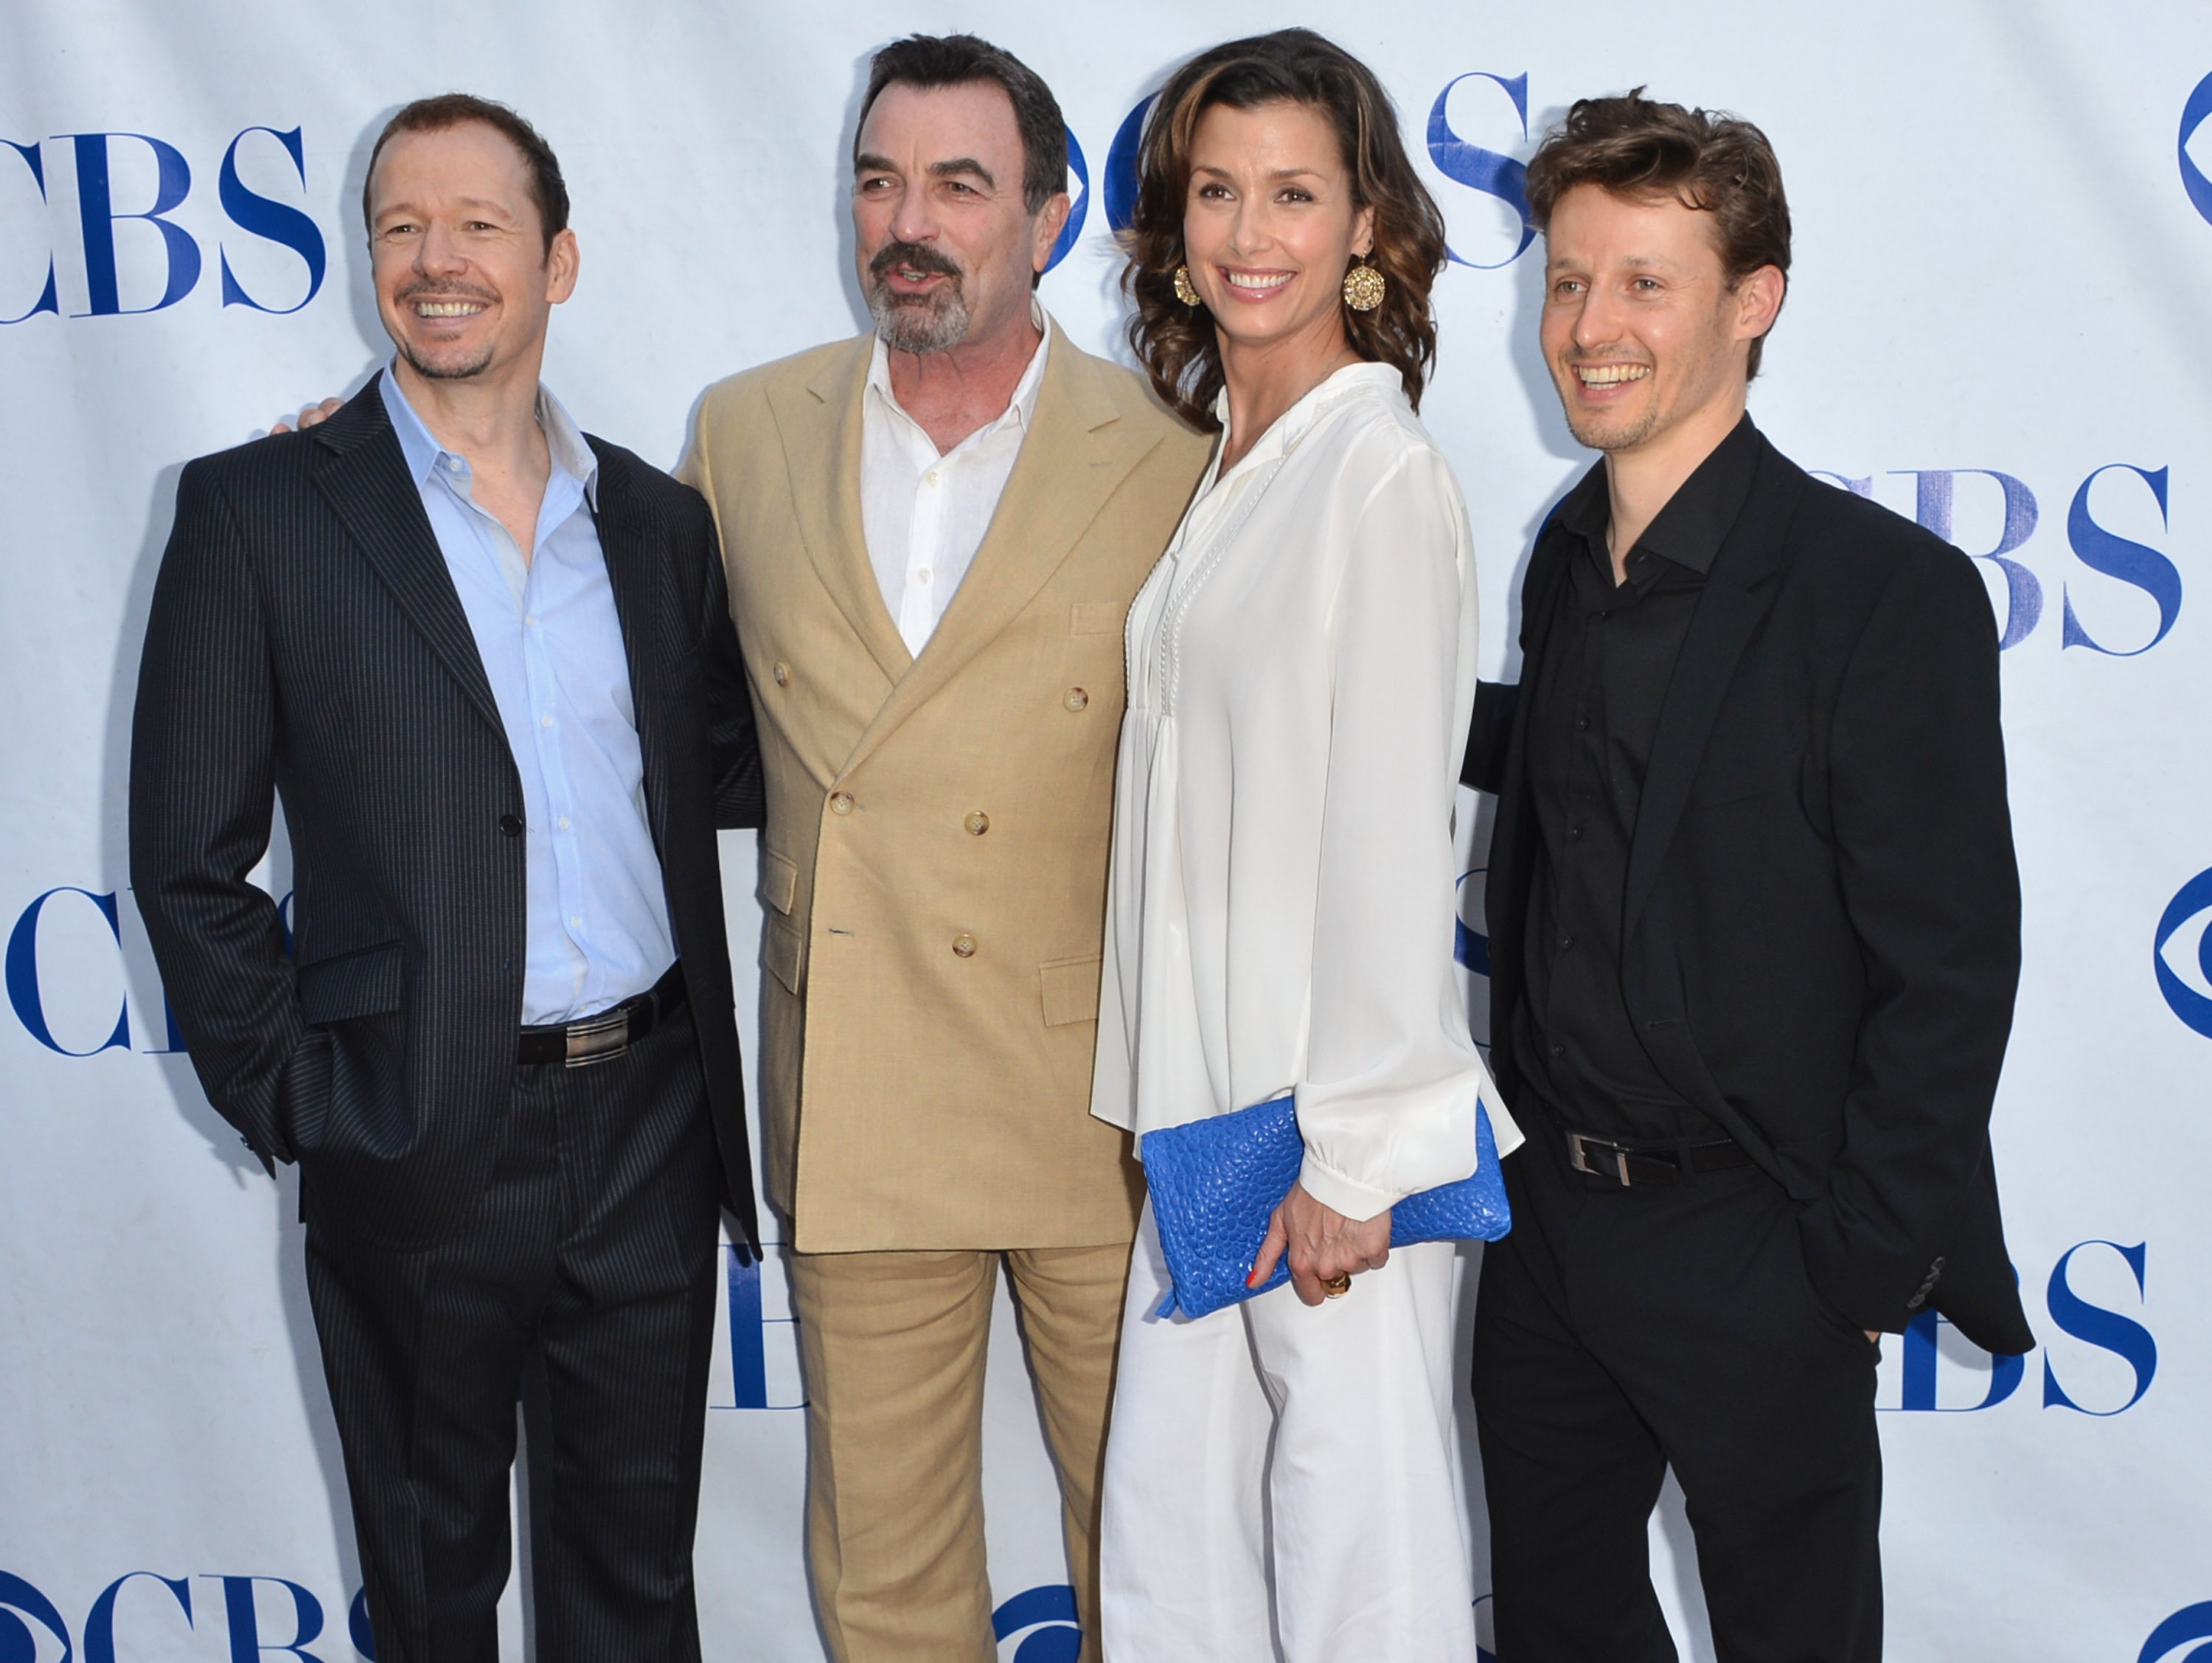 Actors Donnie Wahlberg, Tom Selleck, Bridget Moynahan and Will Estes arrive to a screening and panel discussion of CBS's "Blue Bloods" at Leonard H. Goldenson Theatre on June 5, 2012 in North Hollywood, California | Photo: Getty Images